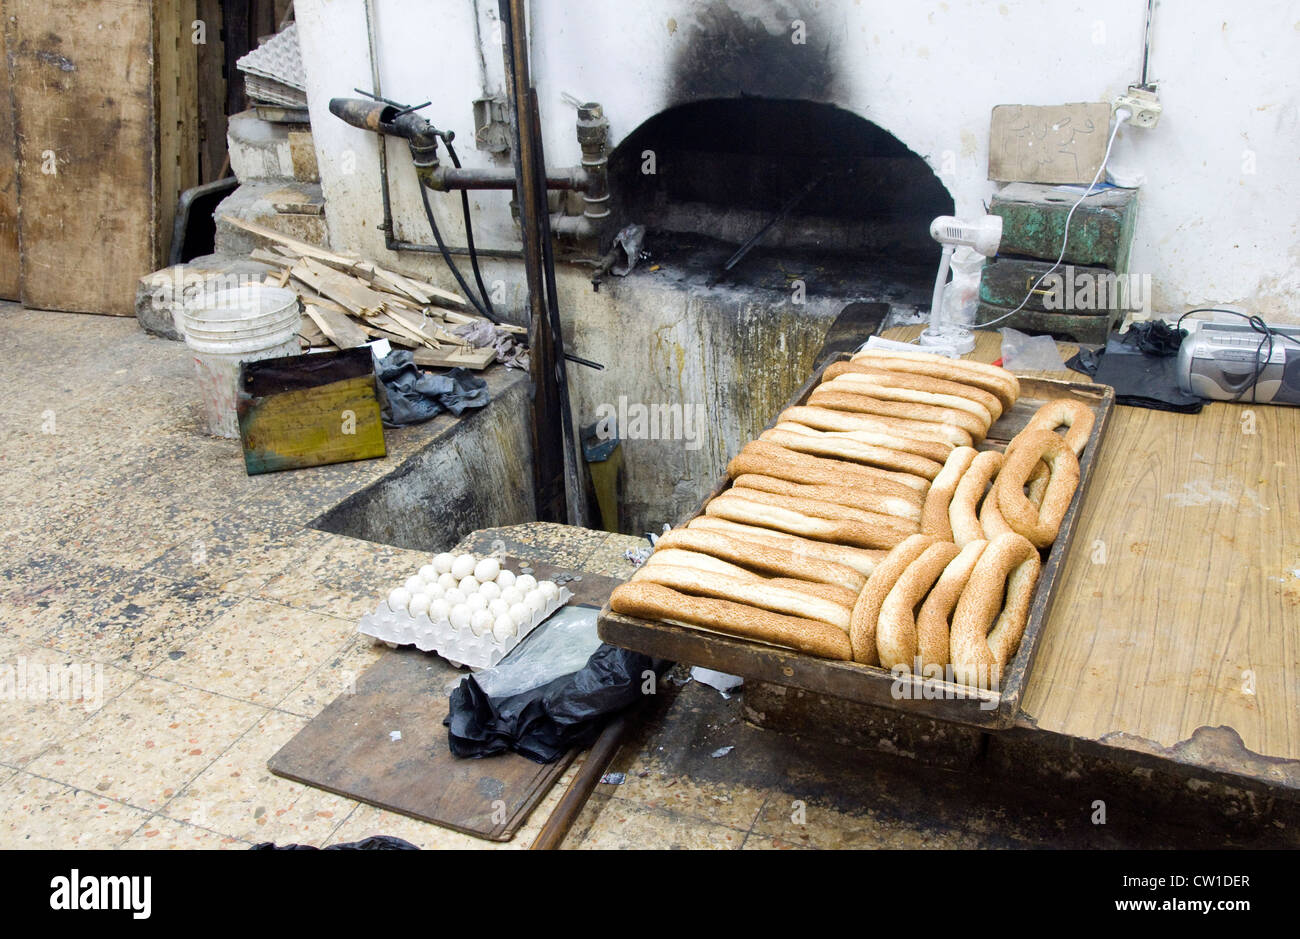 local bakery fresh bread ancient oven and igredients old city Jerusalem Palestine Israel Stock Photo